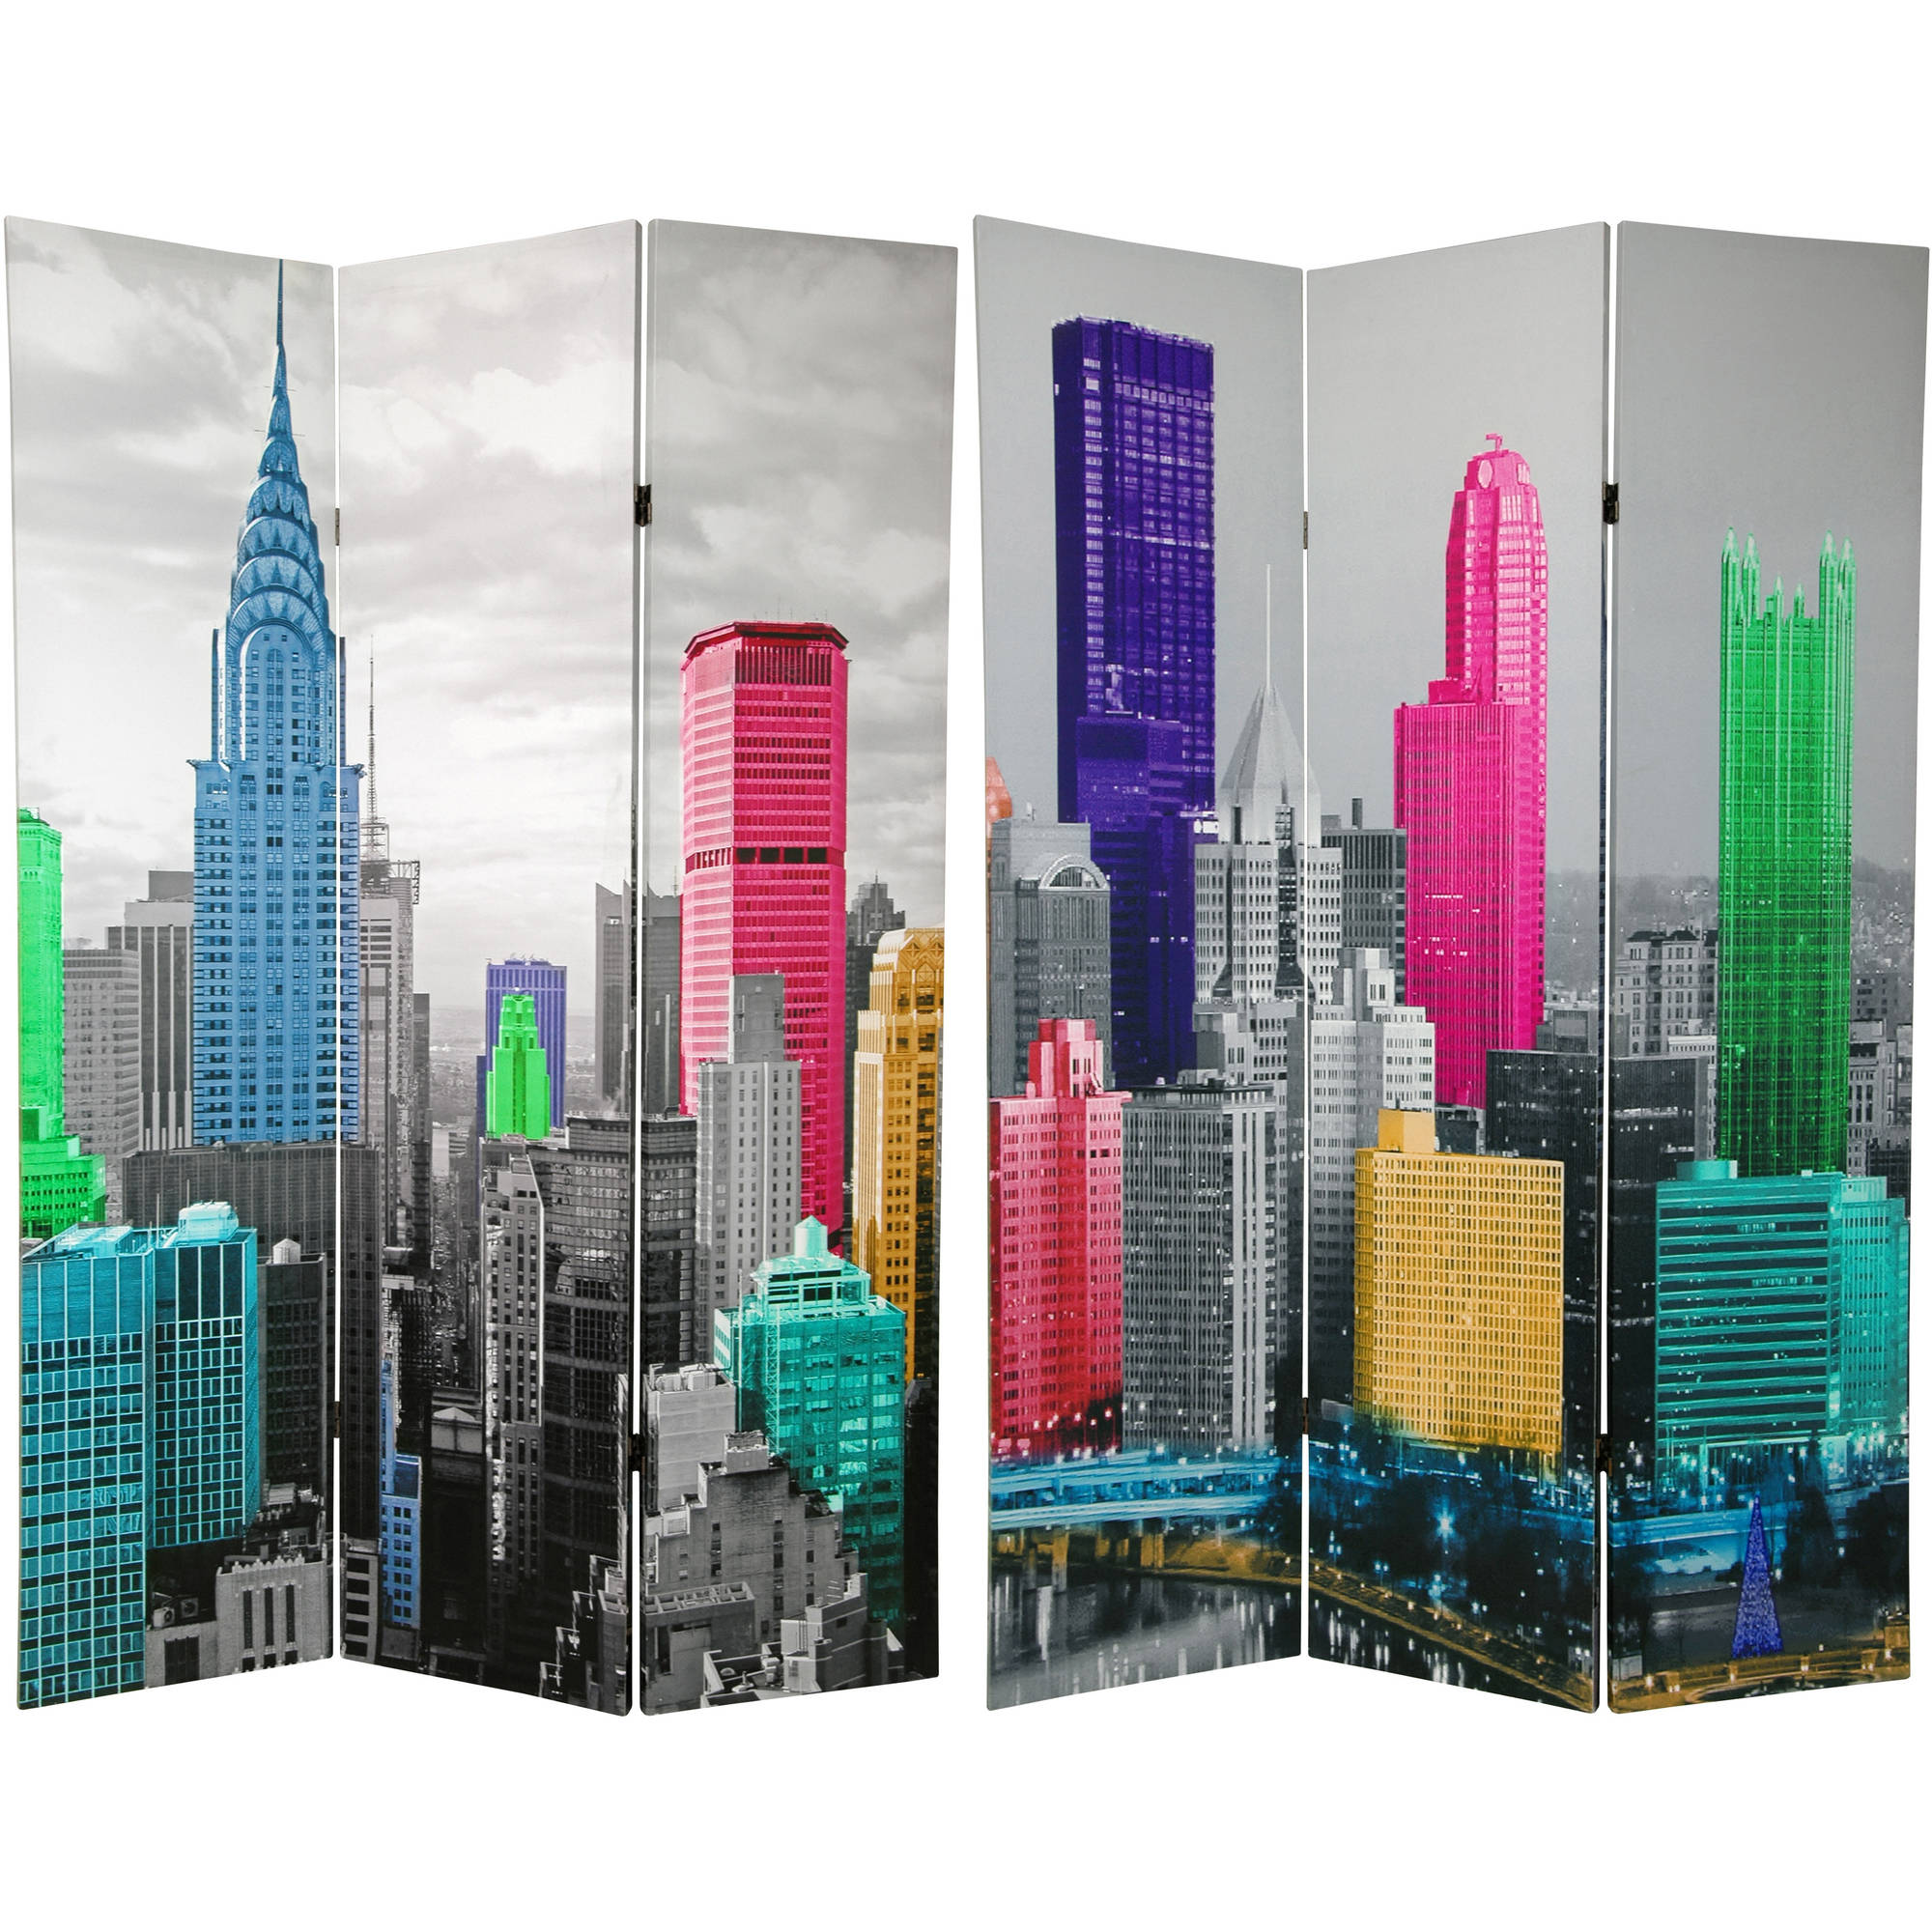 Oriental Furniture 6 ft. Tall Colorful New York Scene Room Divider - 3 Panel - image 1 of 3